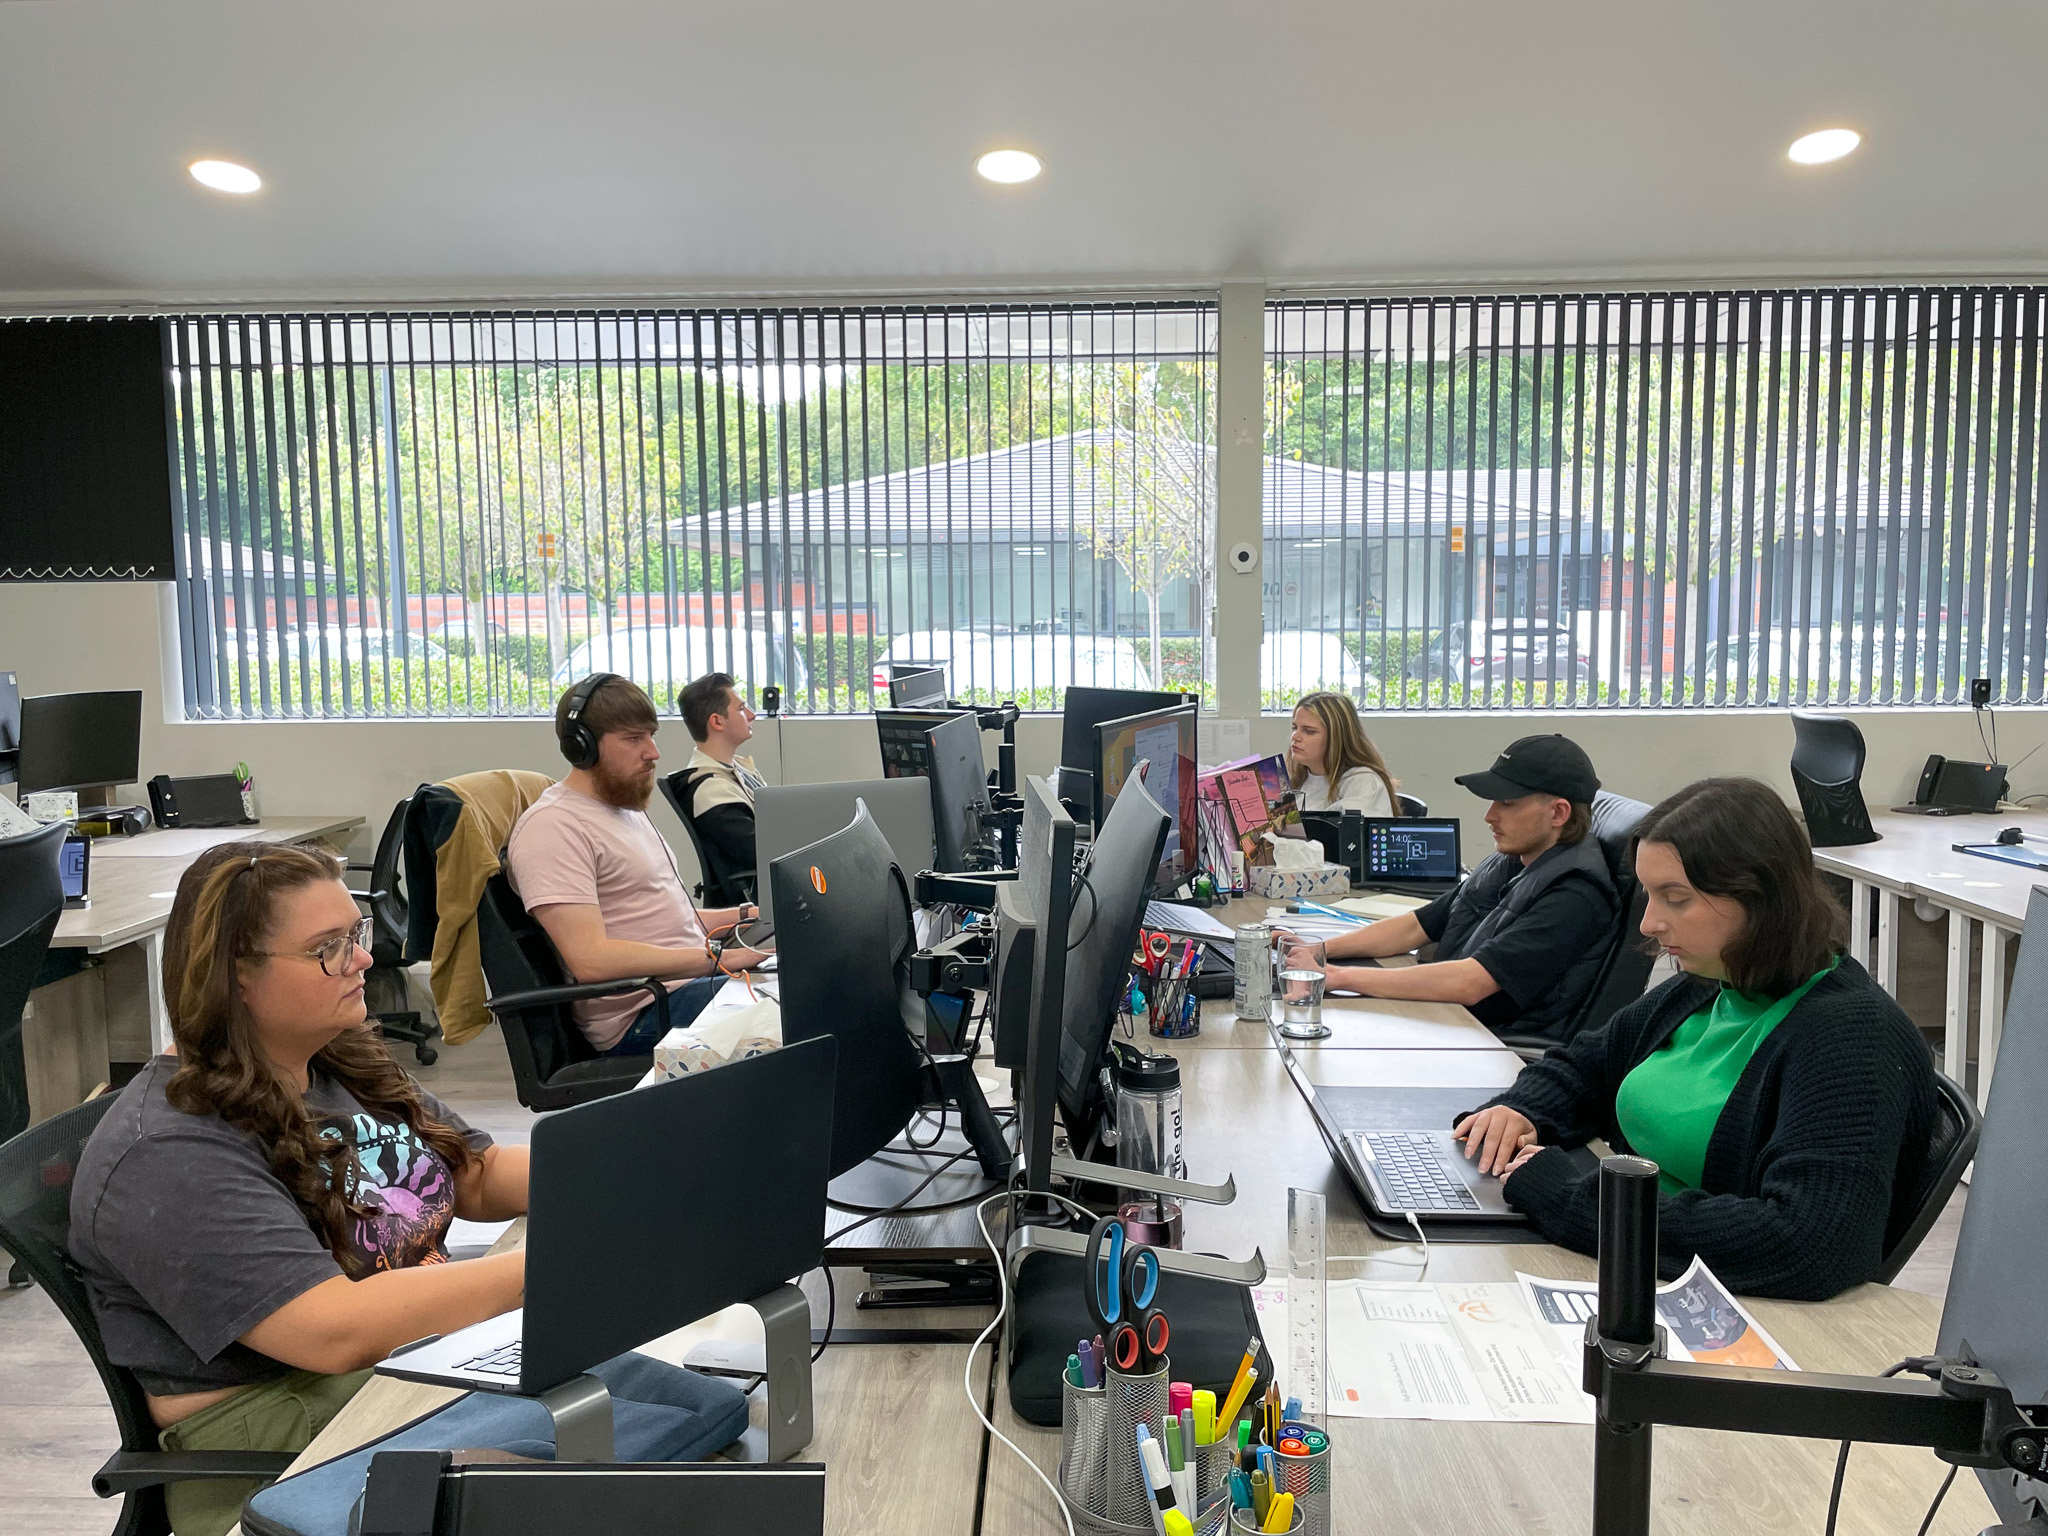 Photograph of Blue Whale Media staff working in-office. Visible in the photograph are: Molly Bailey, Alex Whitehouse, Jessica Thornton, Danielle Whittaker, Anthony Trantum and Jamie Smith